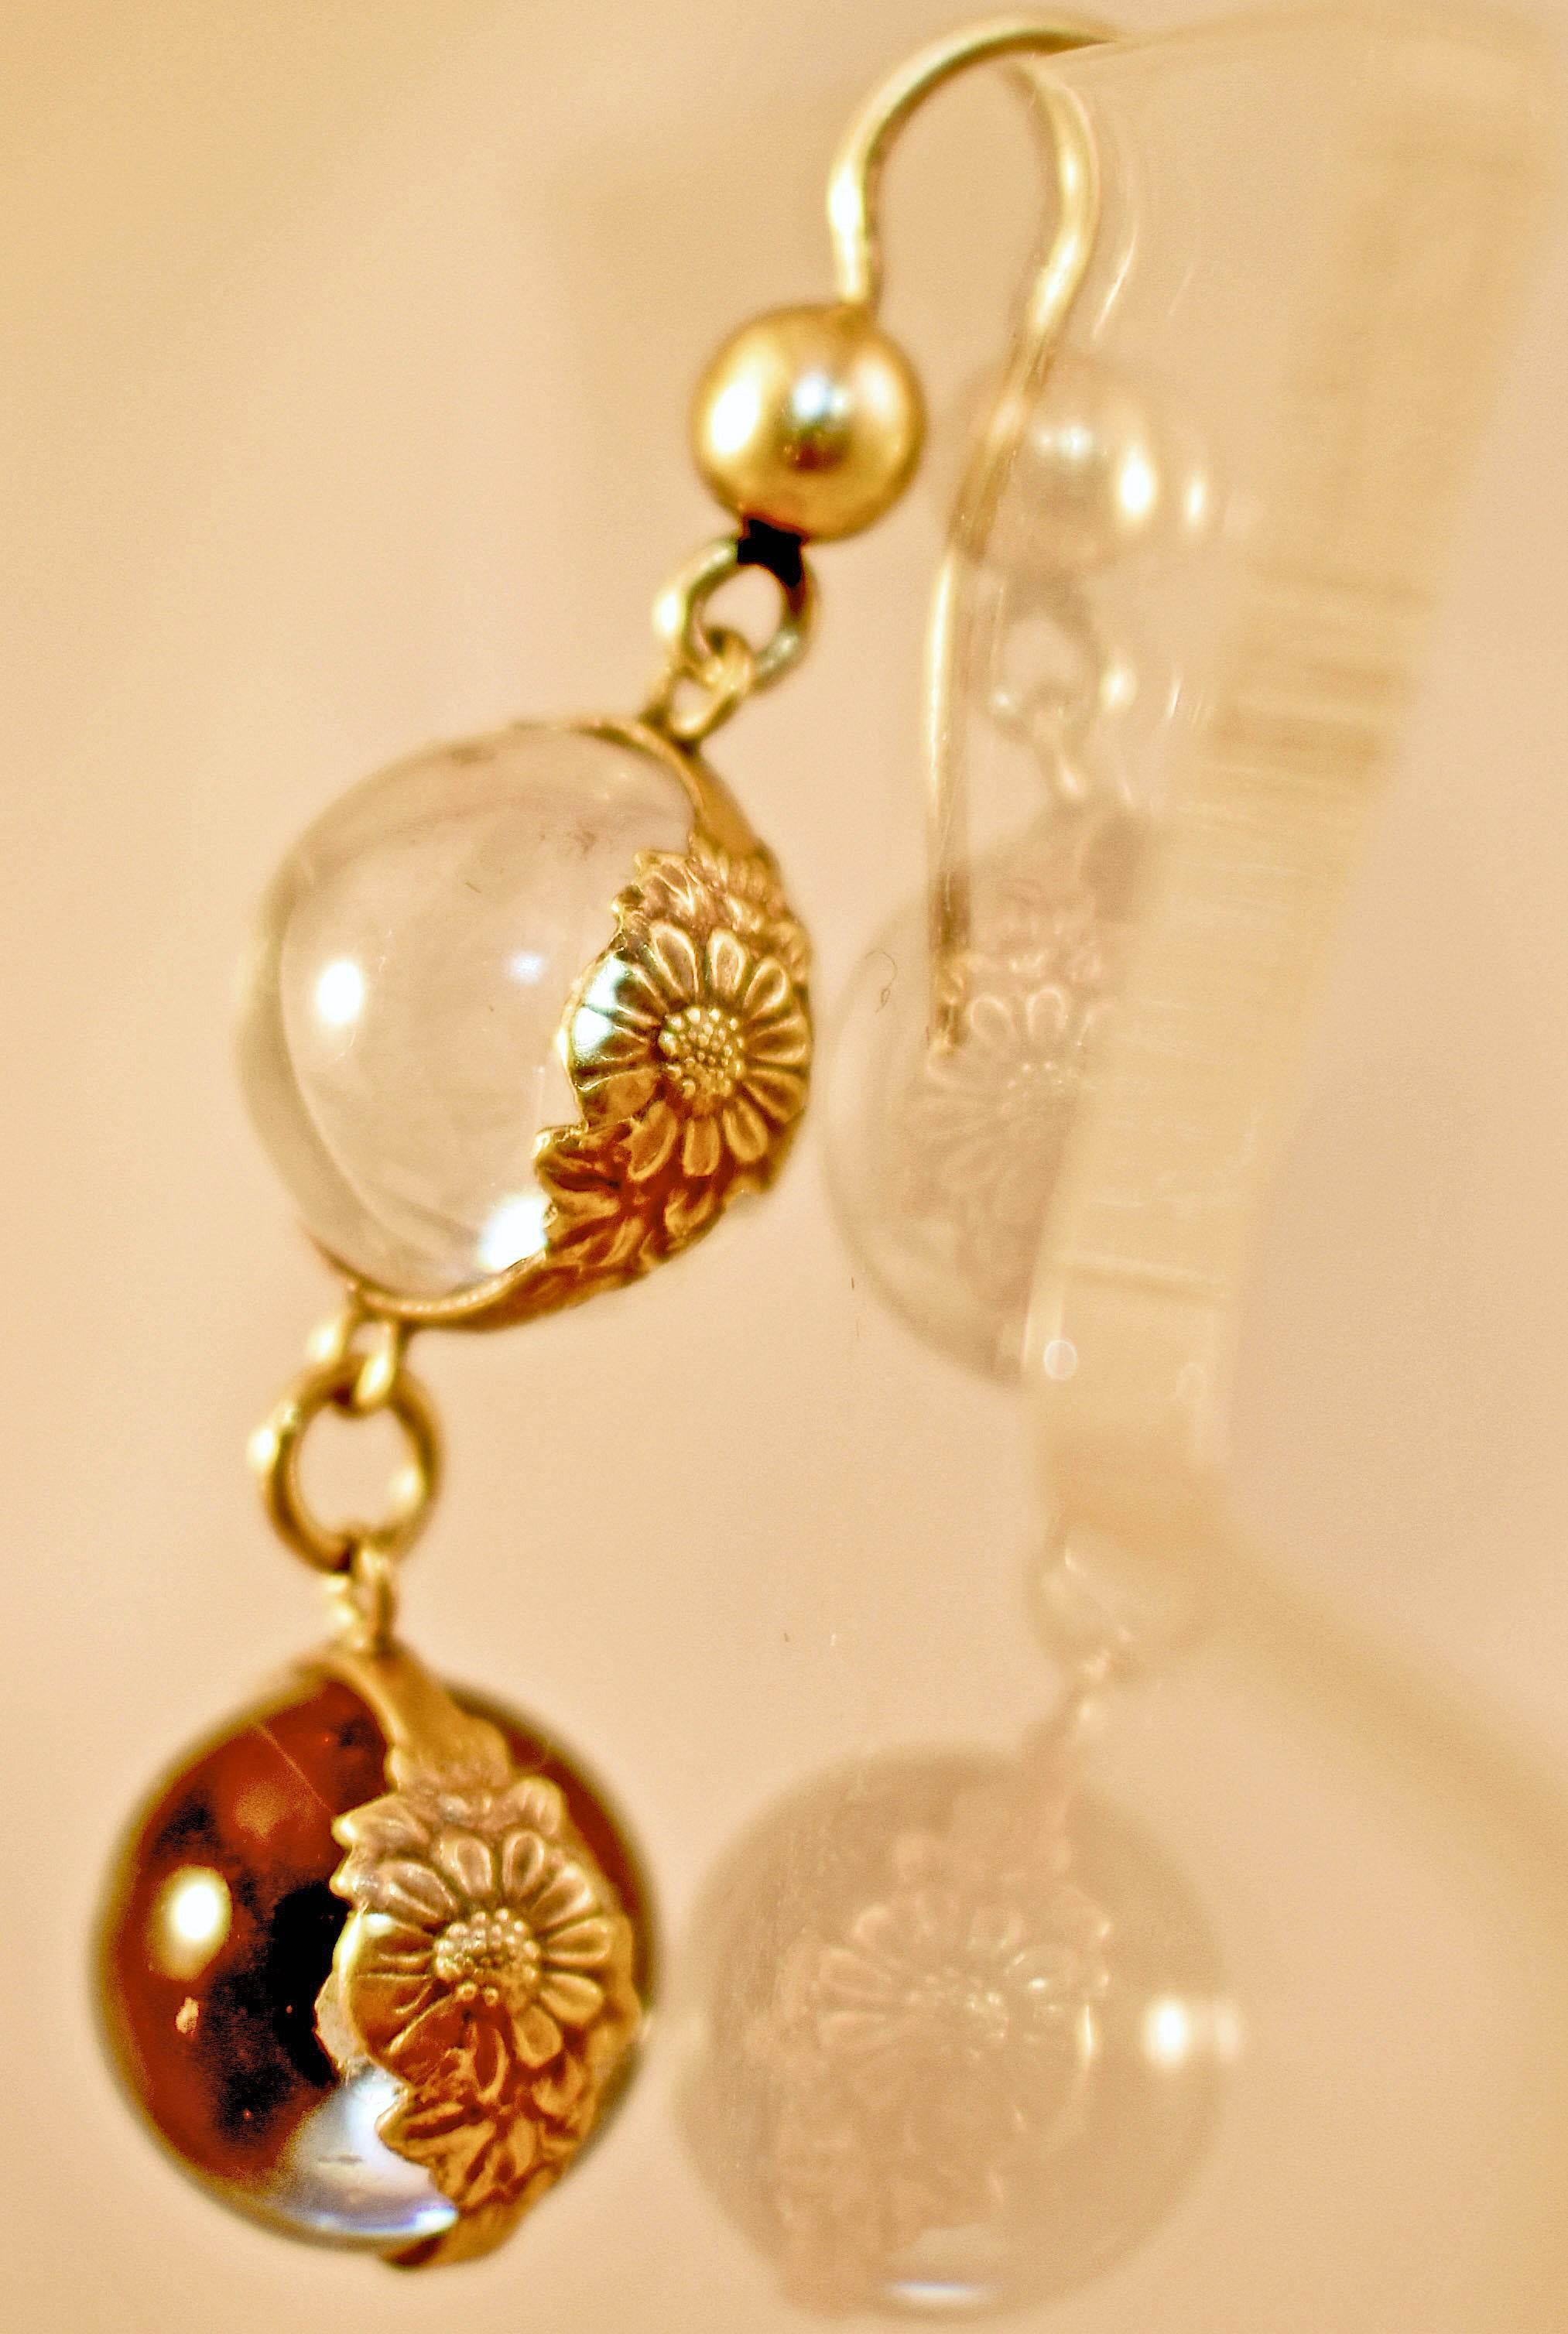 Lovely late Victorian rock crystal earrings set in 9K gold. The crystal orbs were called pools of light. In the Chinese tradition, each crystal orb contains a bit of chi (good energy) within it. These earrings will bring that chi to the one lucky